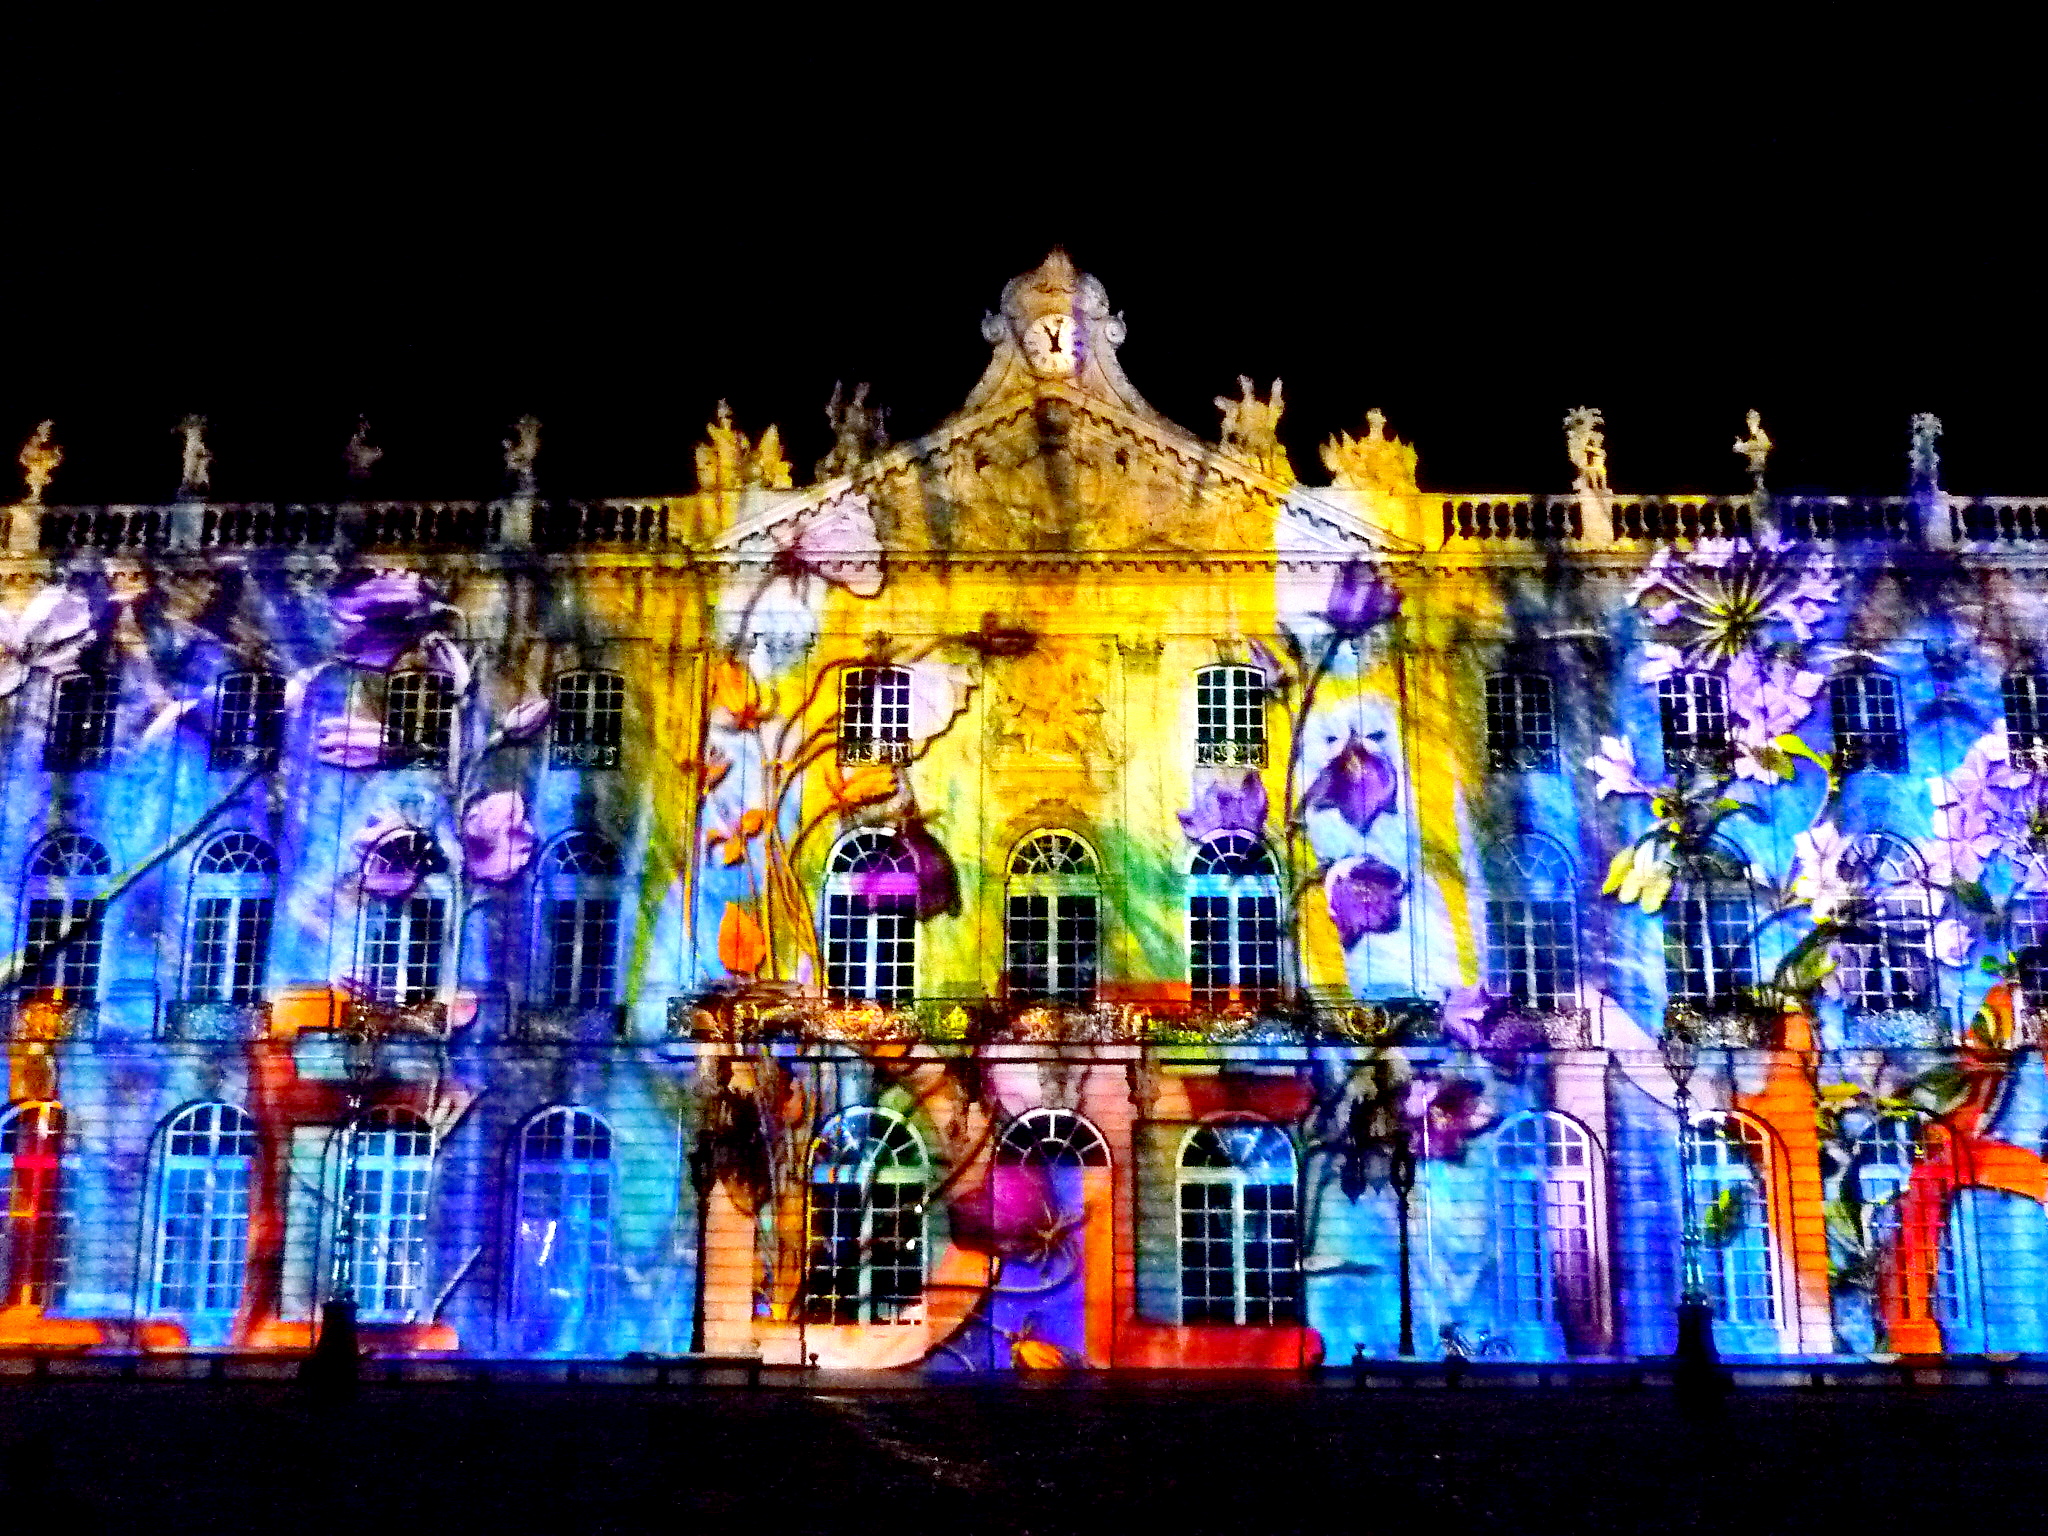 Light Show on Place Stanislas, Nancy © French Moments